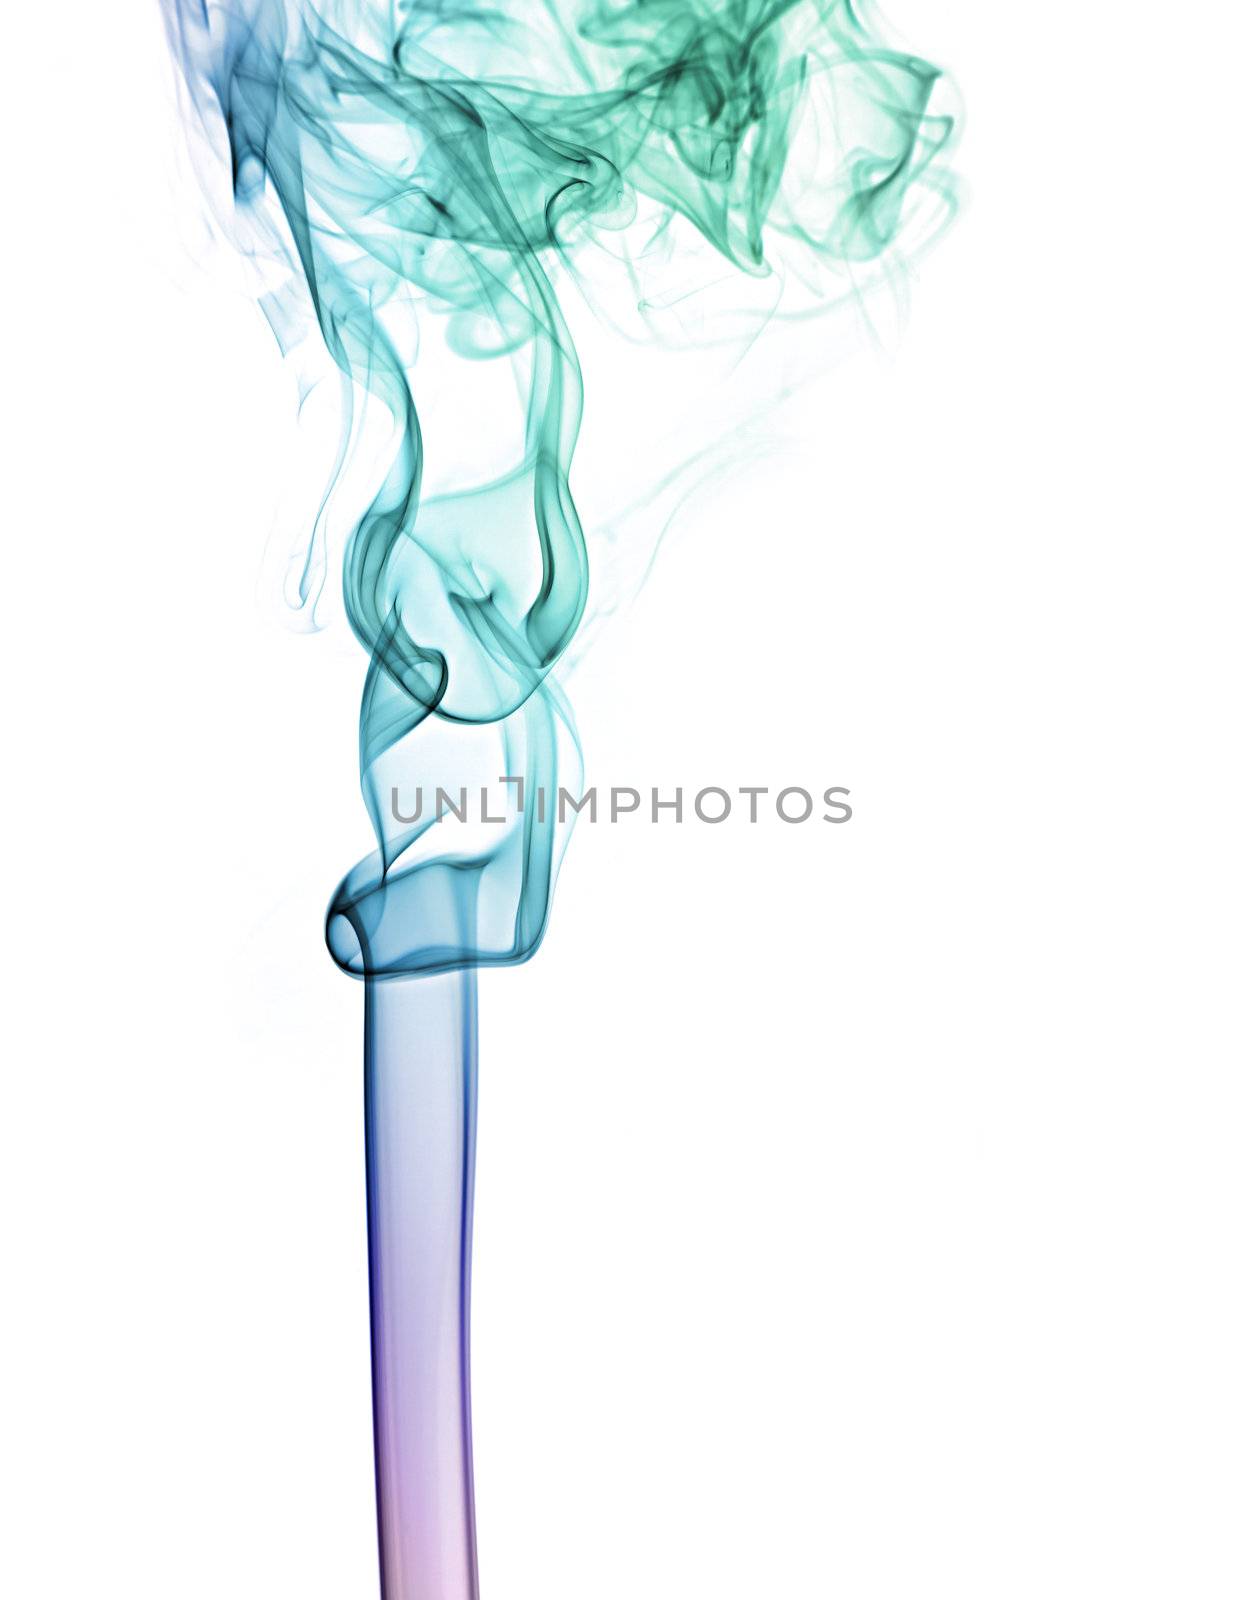 An image of a colorful smoke background